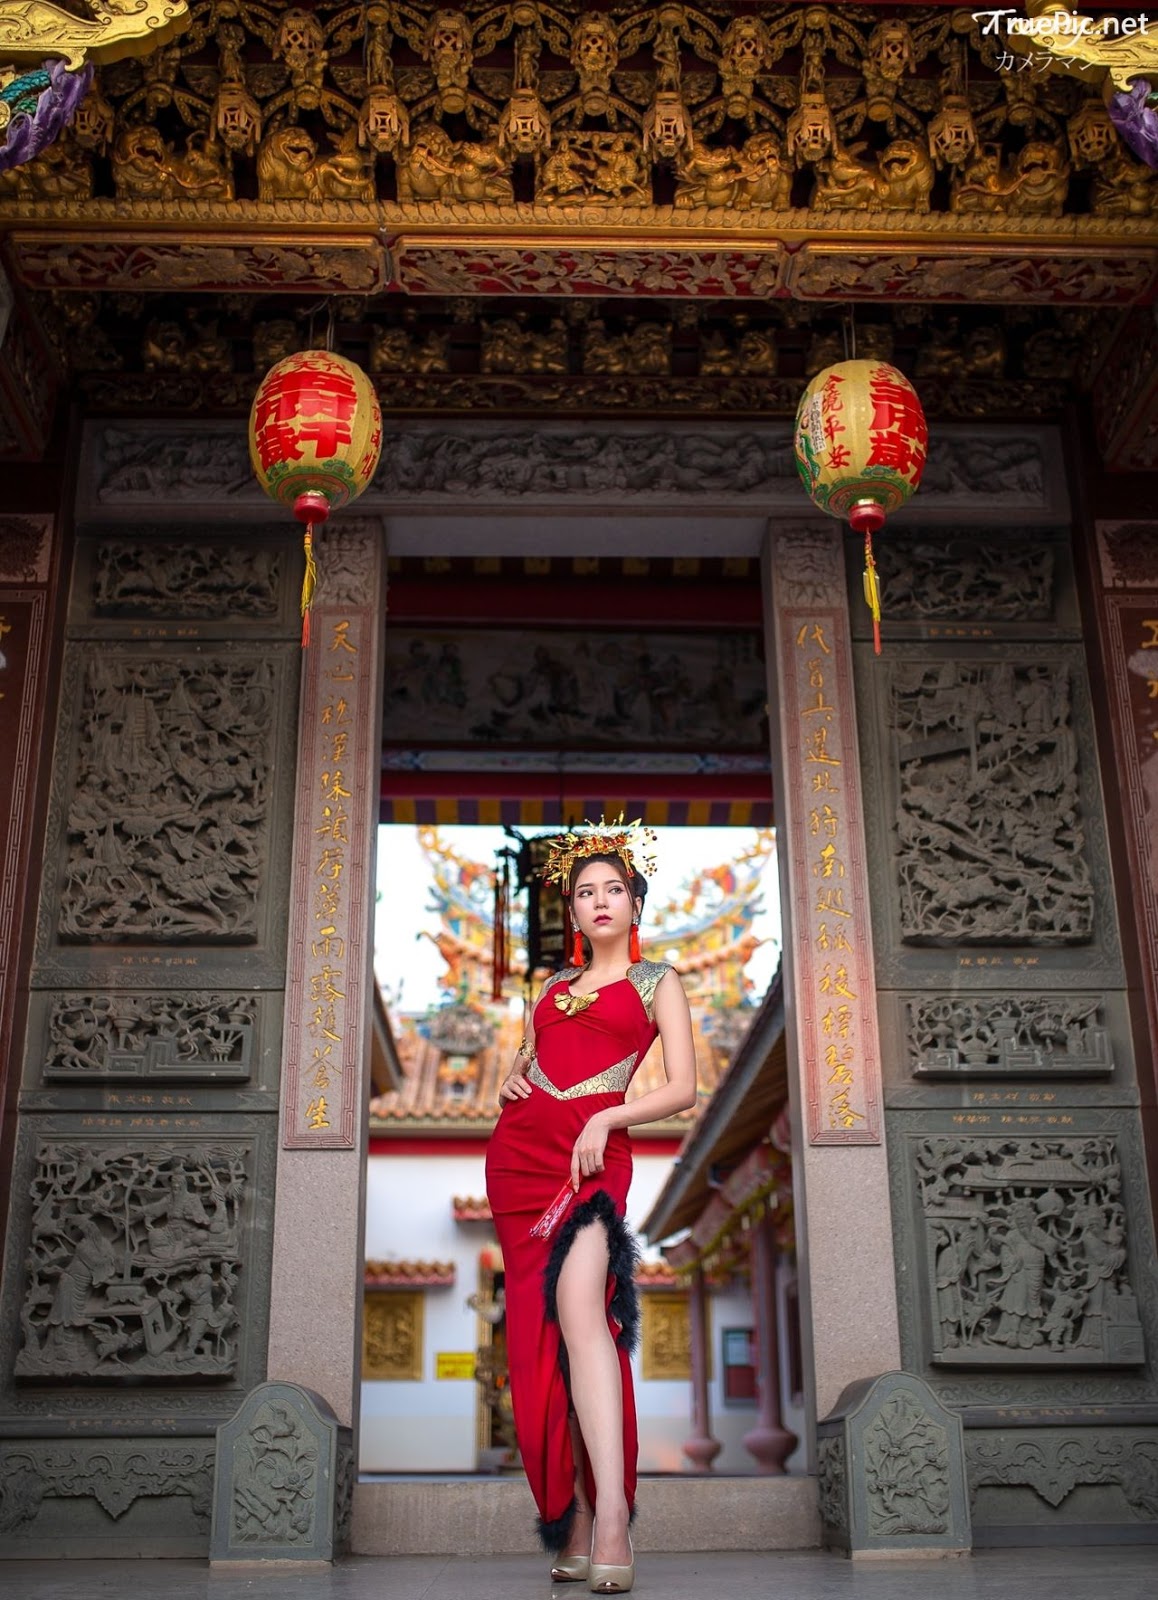 Image-Thailand-Hot-Model-Janet-Kanokwan-Saesim-Sexy-Chinese-Girl-Red-Dress-Traditional-TruePic.net- Picture-35